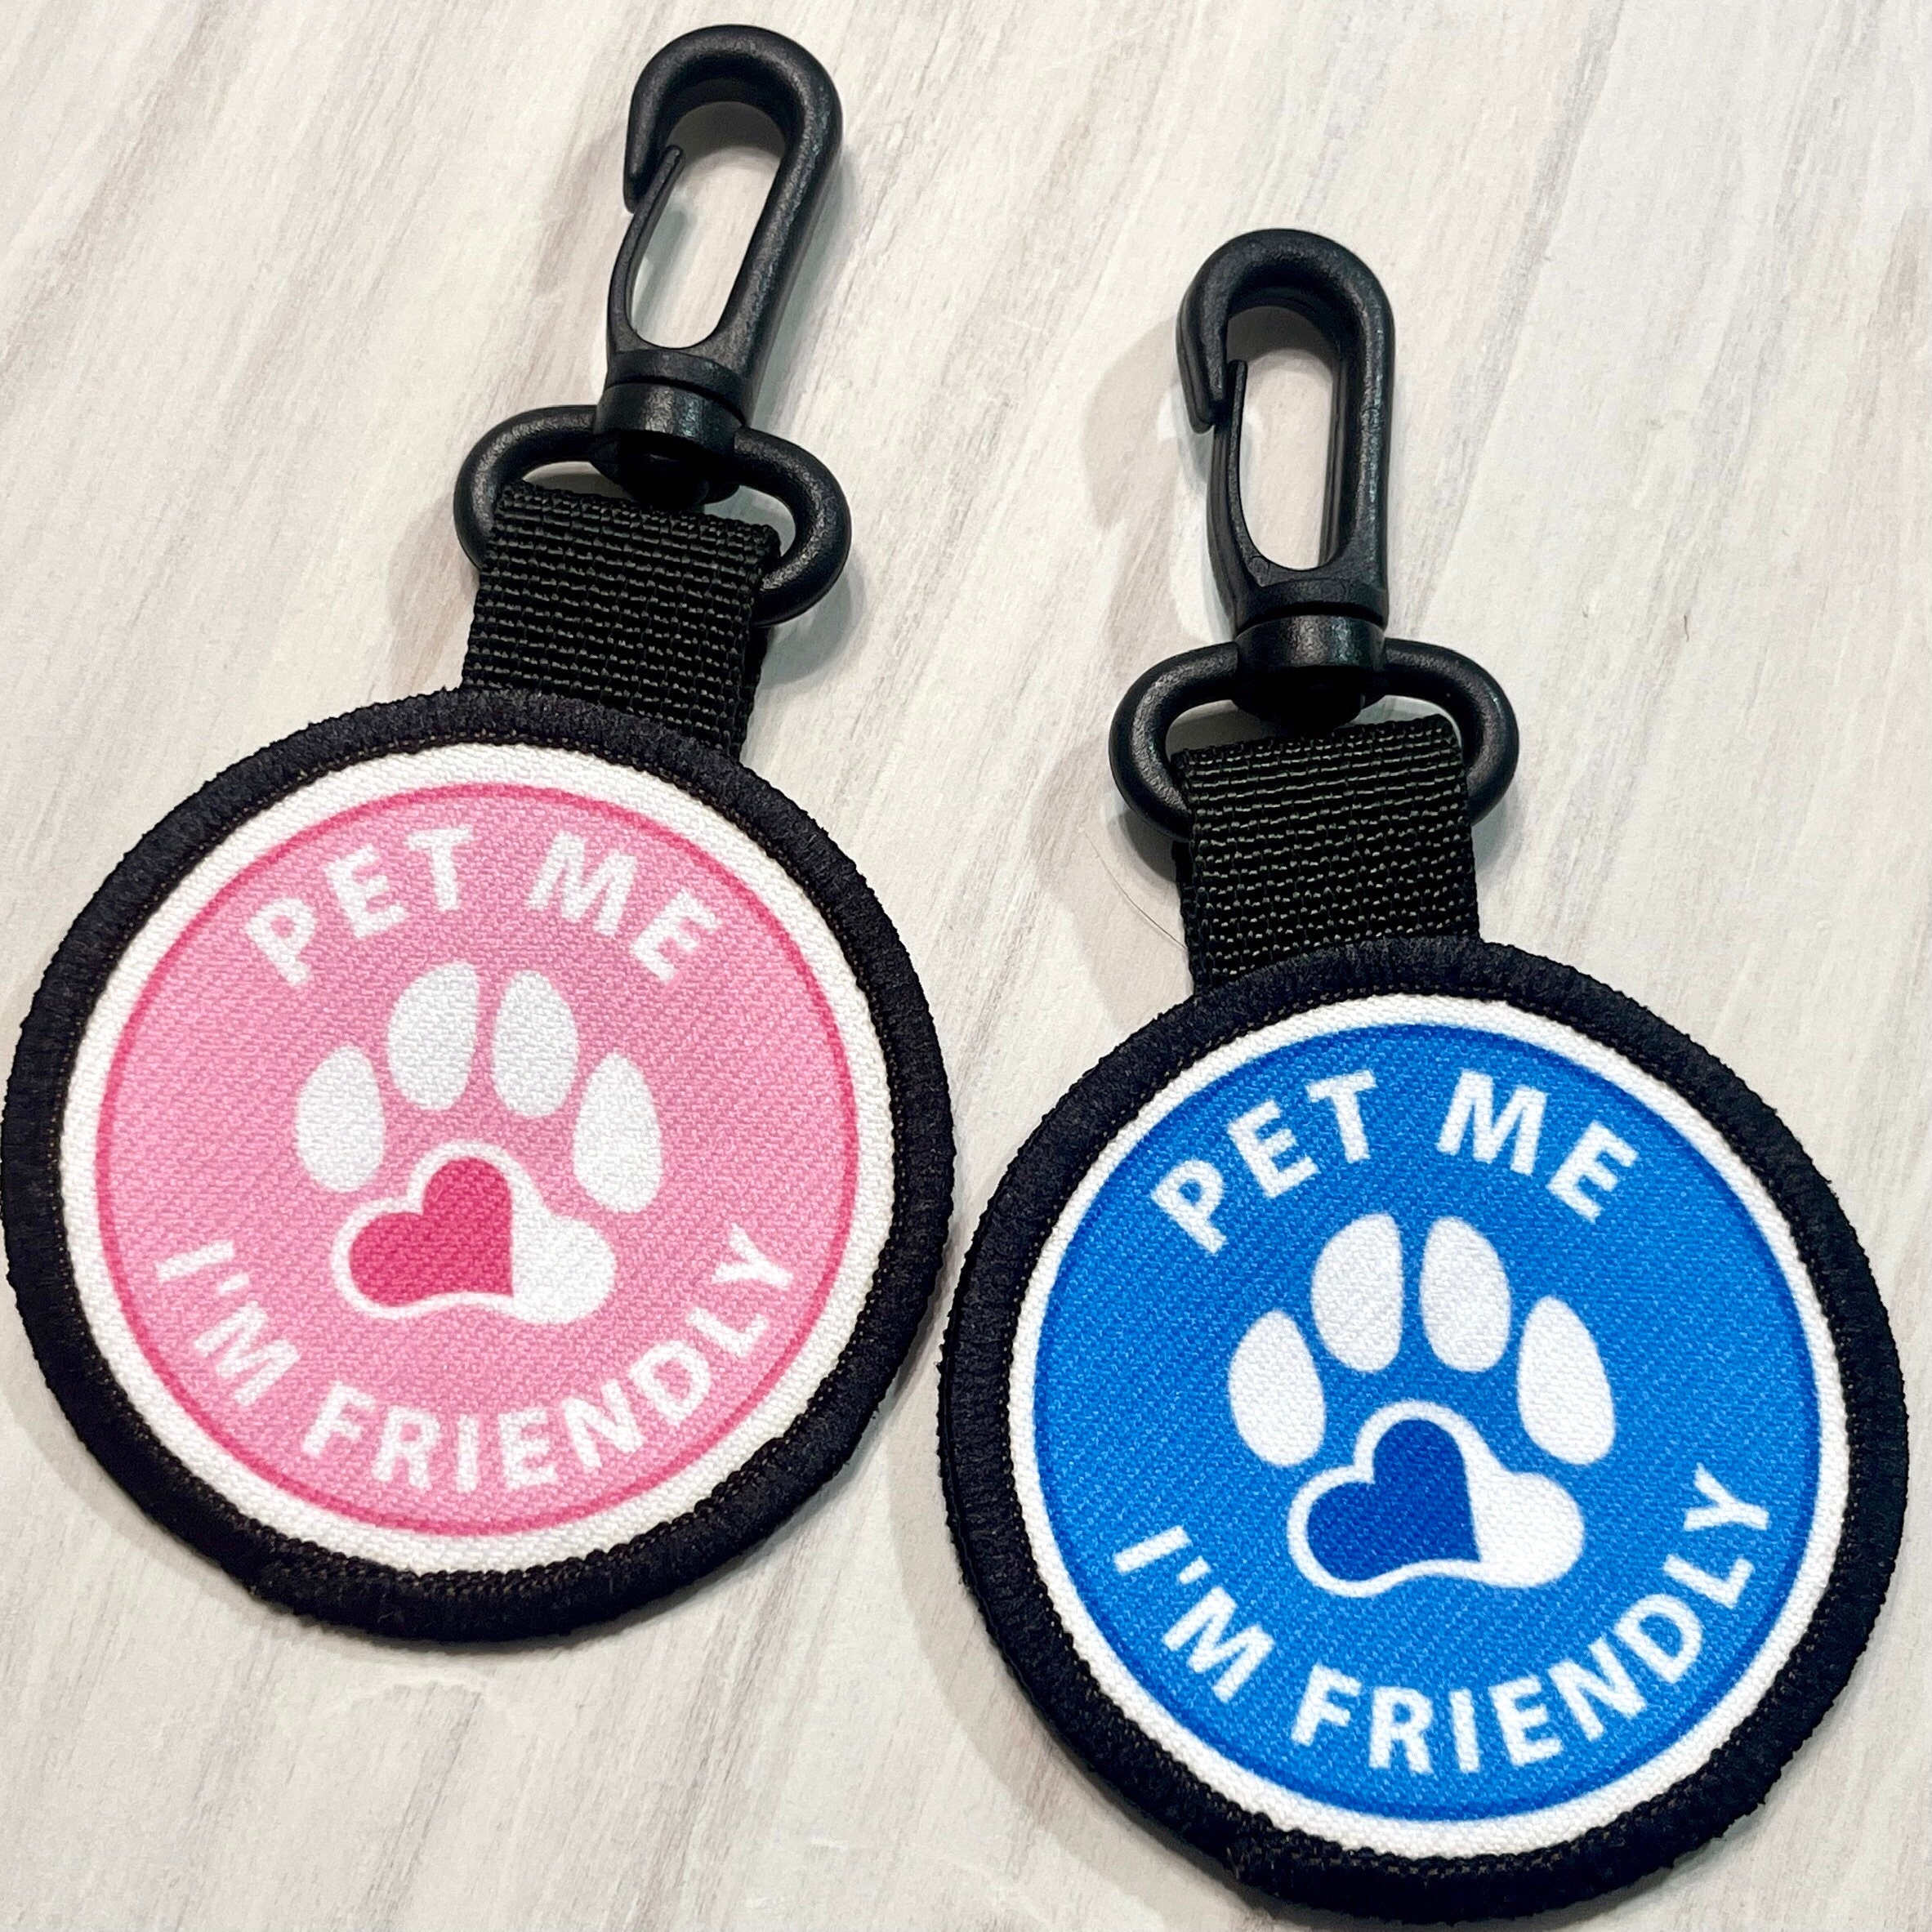 Nervous Dog Patch Ask to Pet Patch Dog Vest Patches Hook Fastener Custom  Harness Dog Patch Anxious Dog Patch for Pet Lovers 